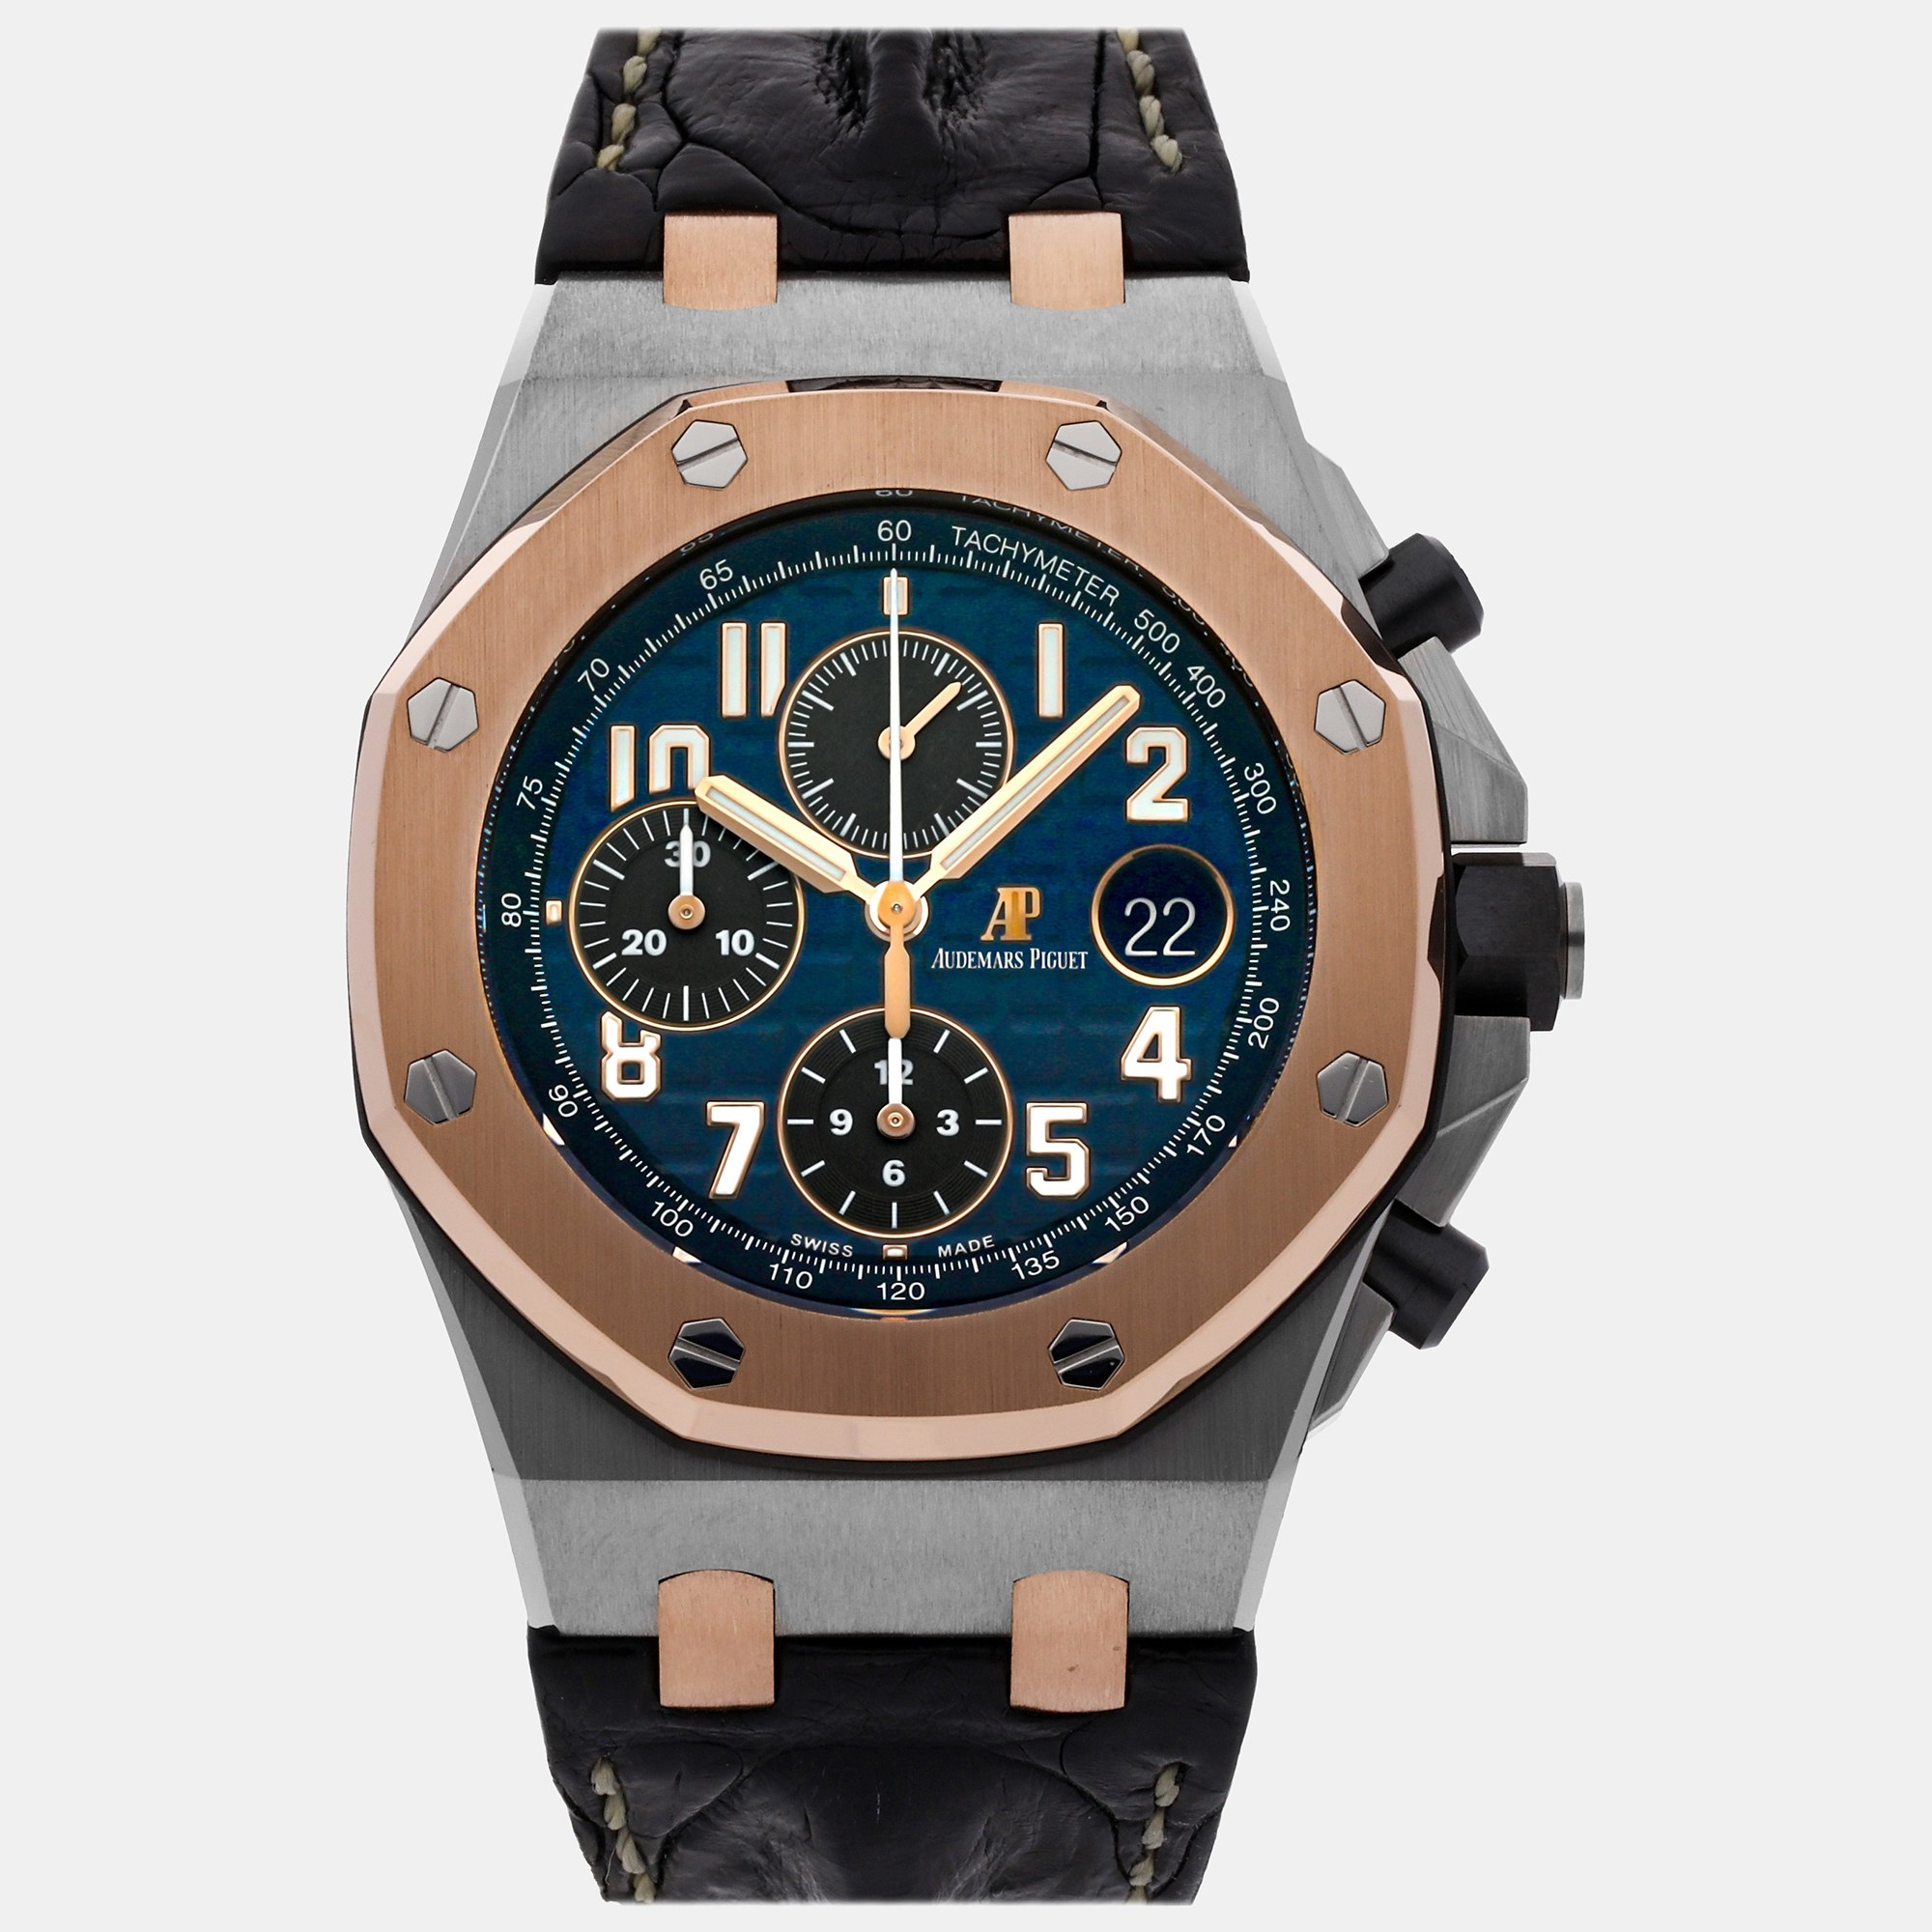 This authentic Audemars Piguet watch is characterized by skillful craftsmanship and understated charm. Meticulously constructed to tell time in an elegant way it comes in a sturdy case and flaunts a seamless blend of innovative design and flawless style.